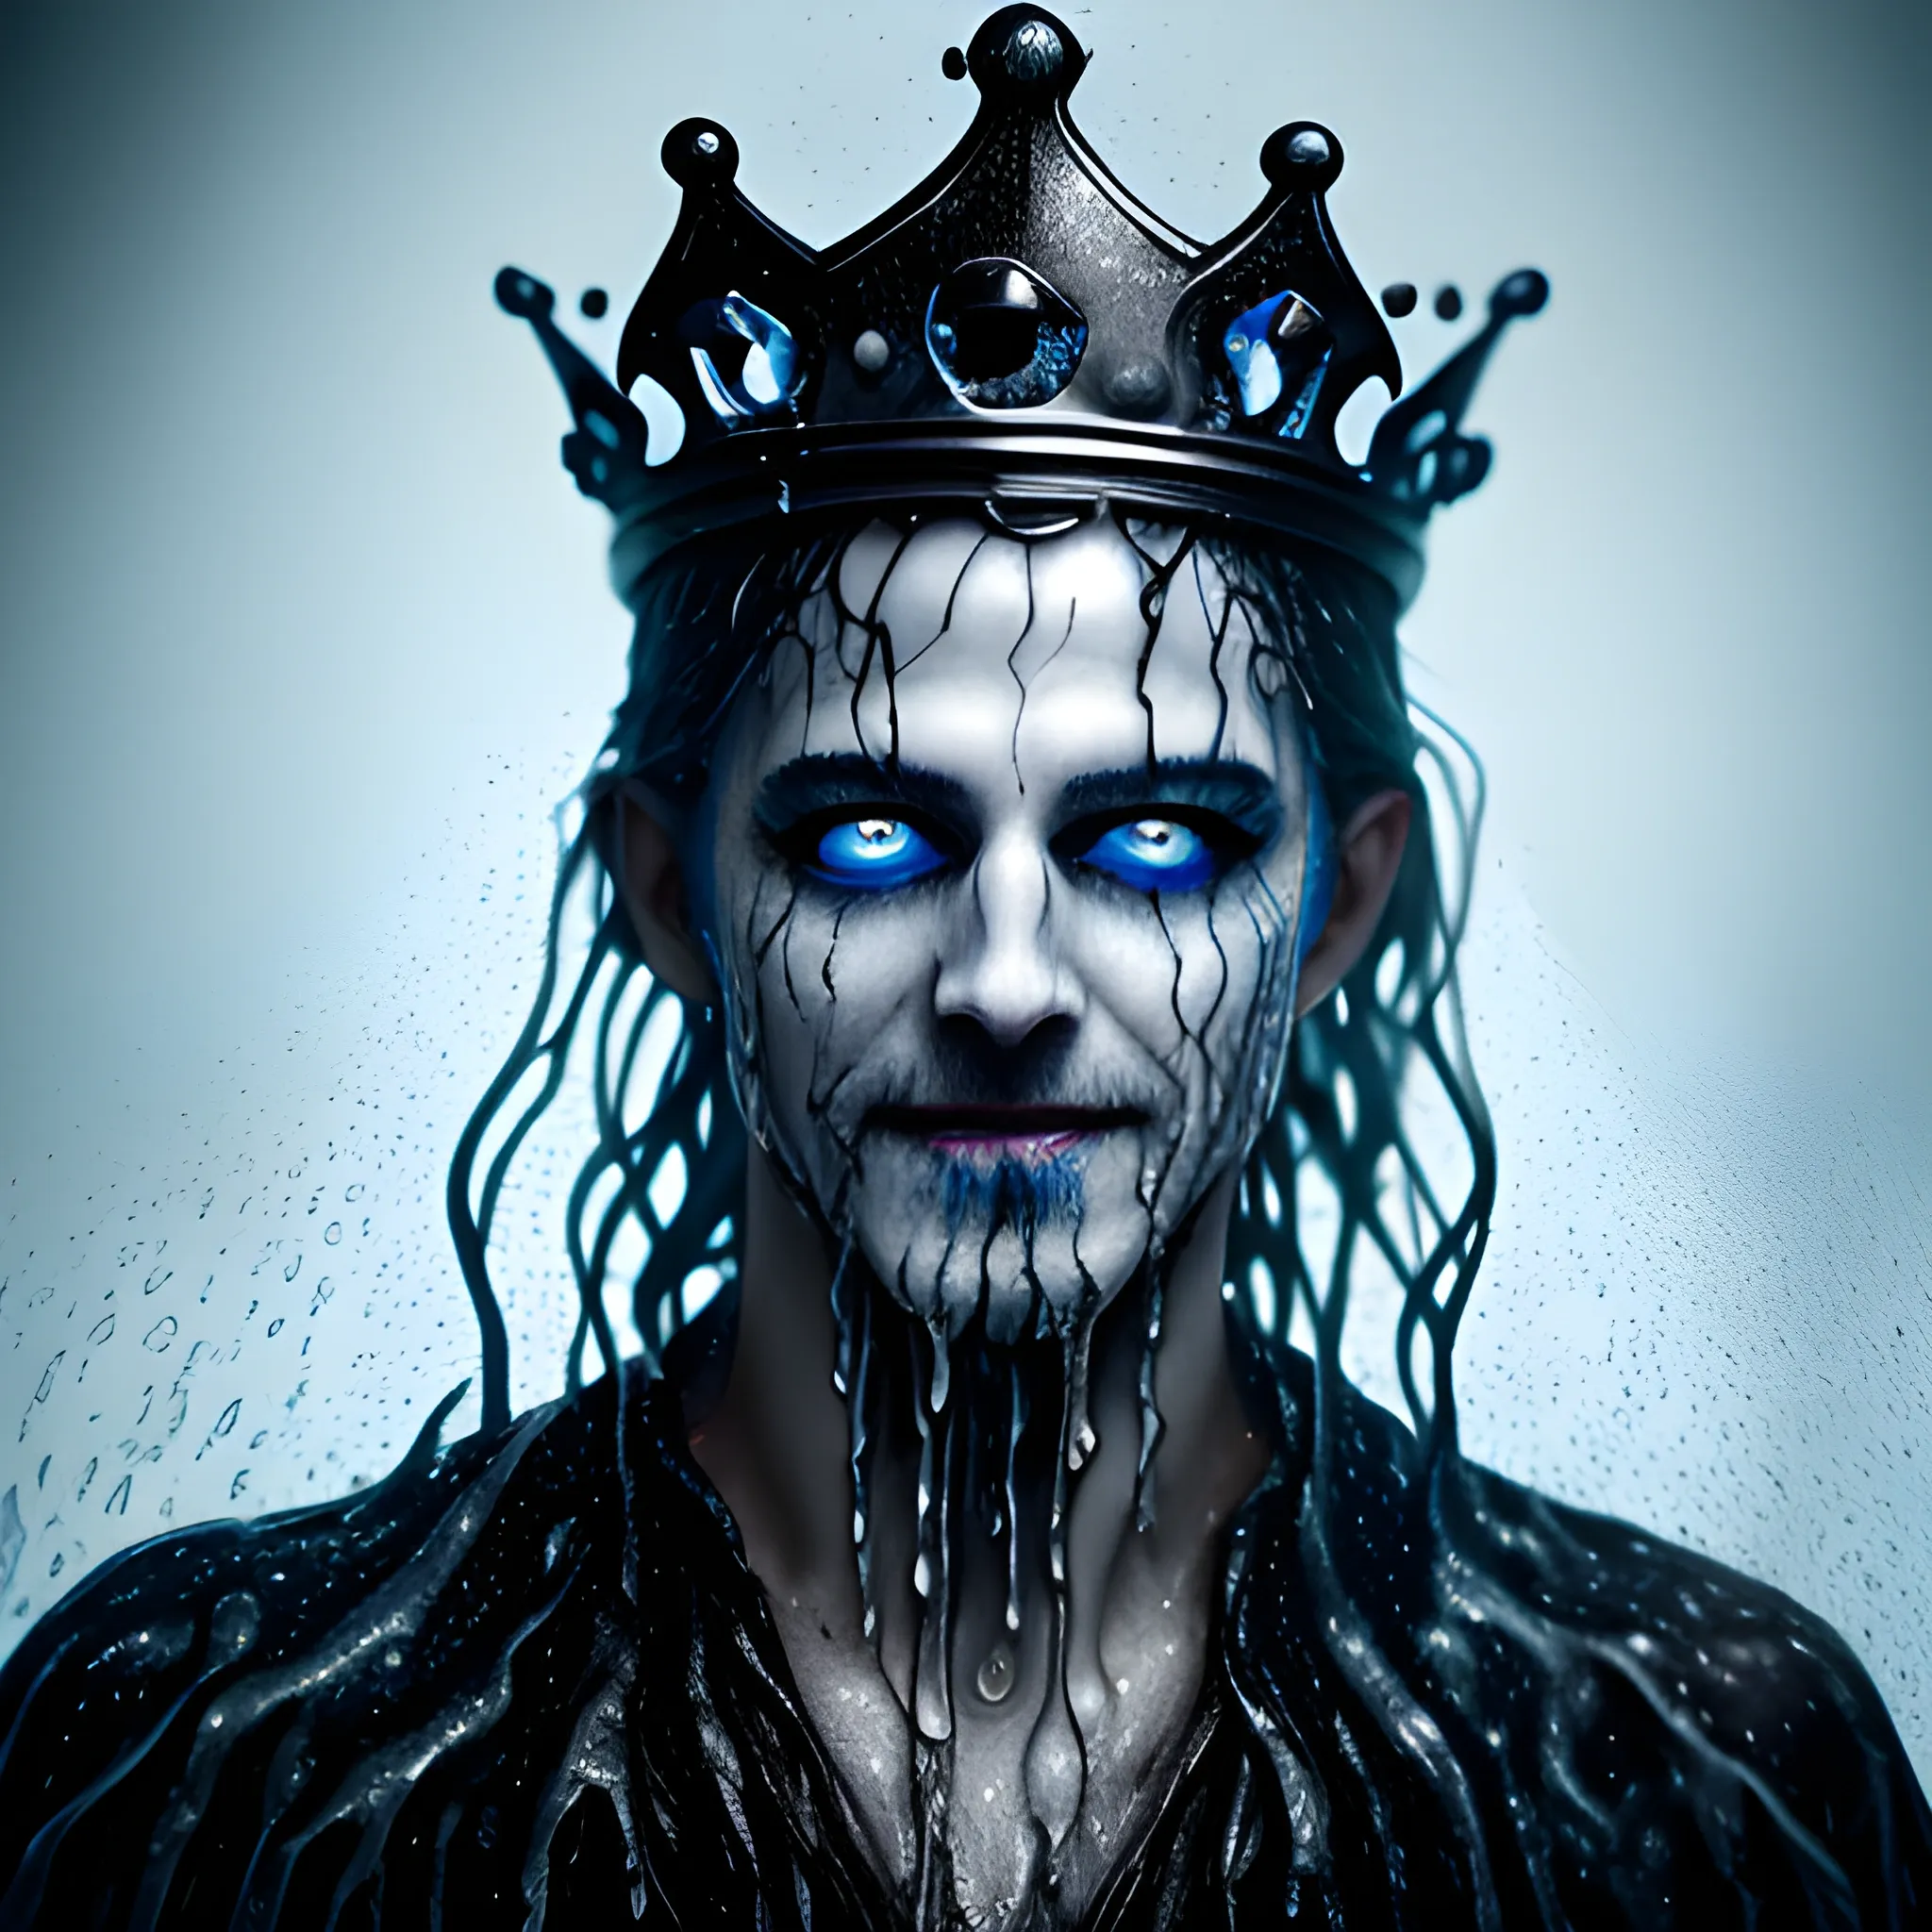 photorealistic image of the king of ghosts soaked in water with a black crown, full body, ominous smile, dimmed lighting, blue painted wet hair, wet makeup, evil grim, bokeh lighting